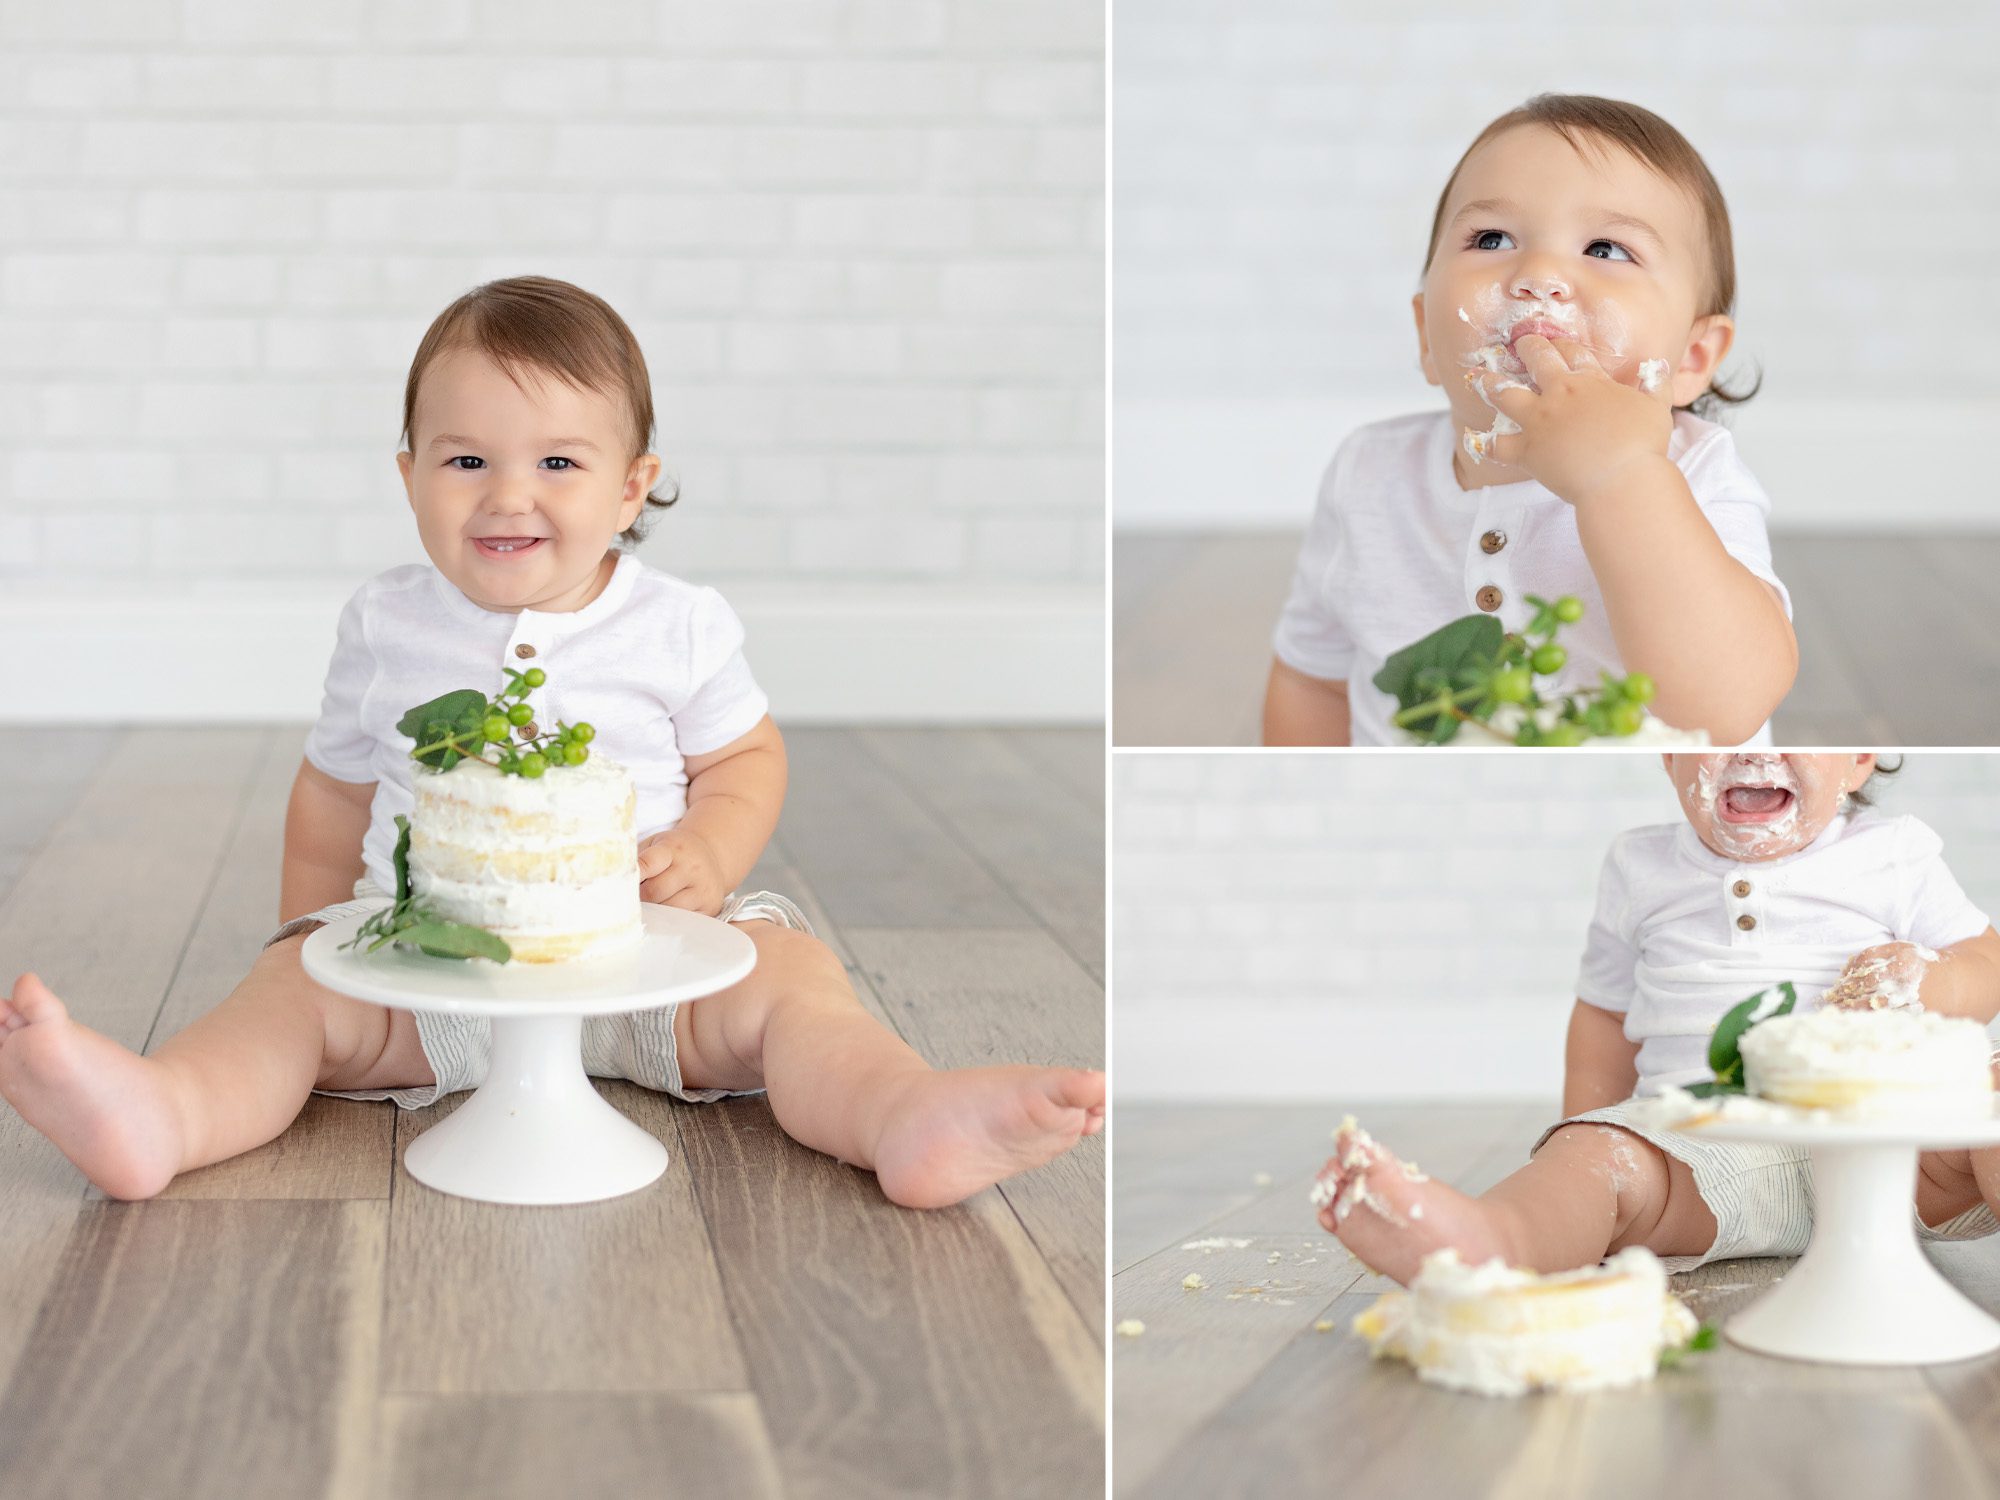 A mom and 1 year old baby boy celebrate his birthday in a bright white studio with snuggly photos and a cake smash.